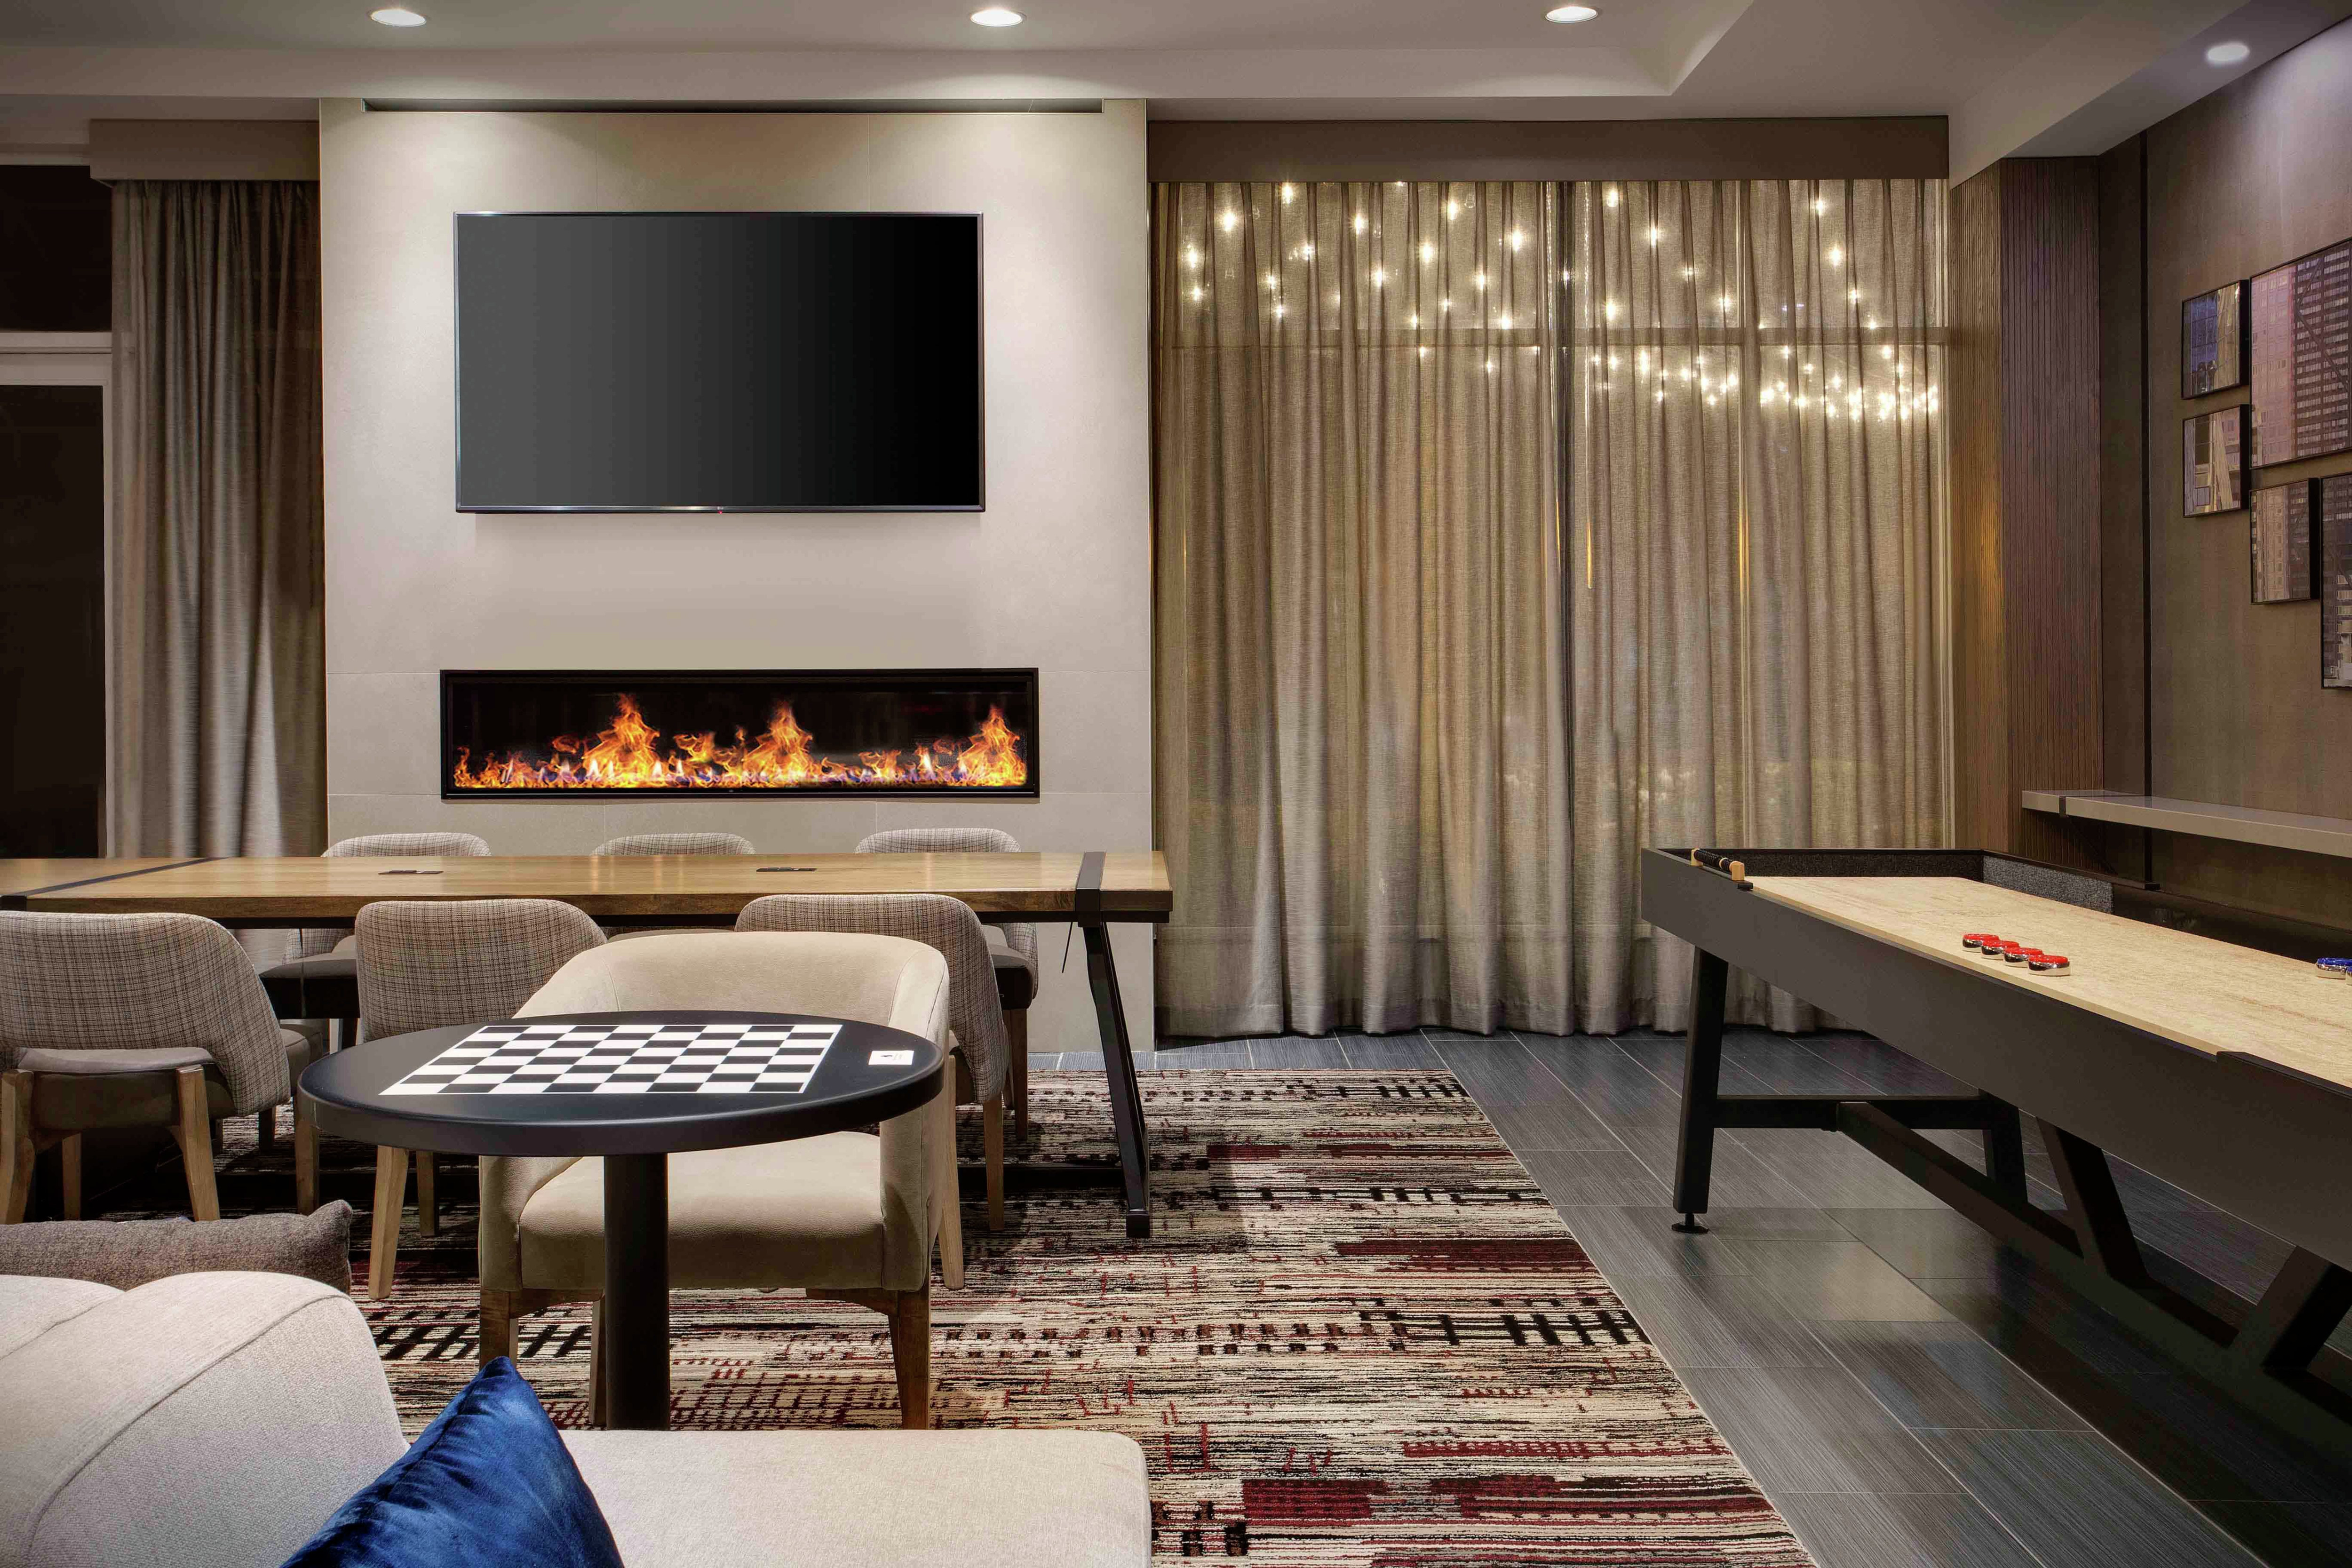 a lobby seating area with a fireplace